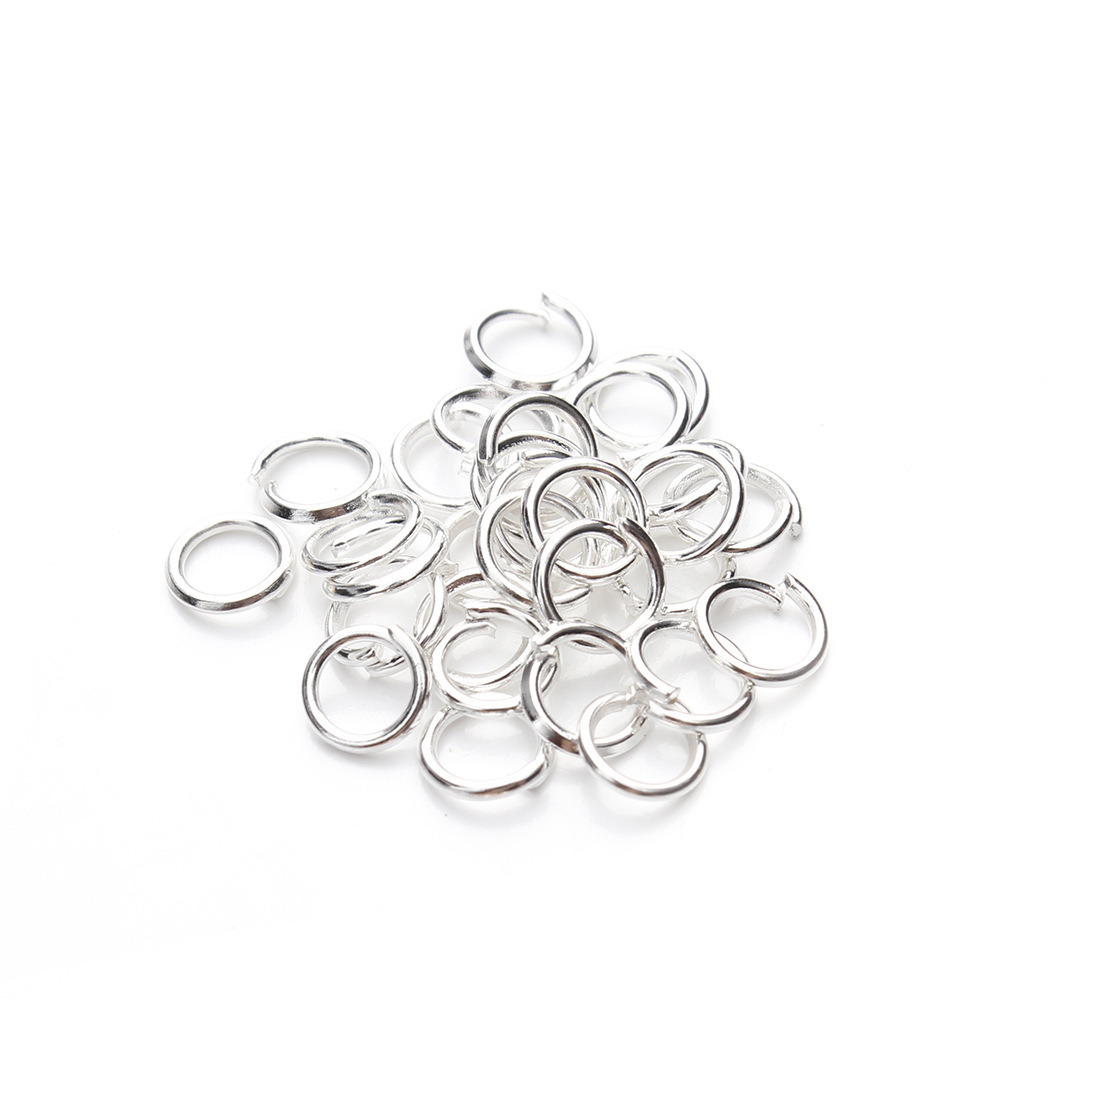 Silver outer diameter 8mm